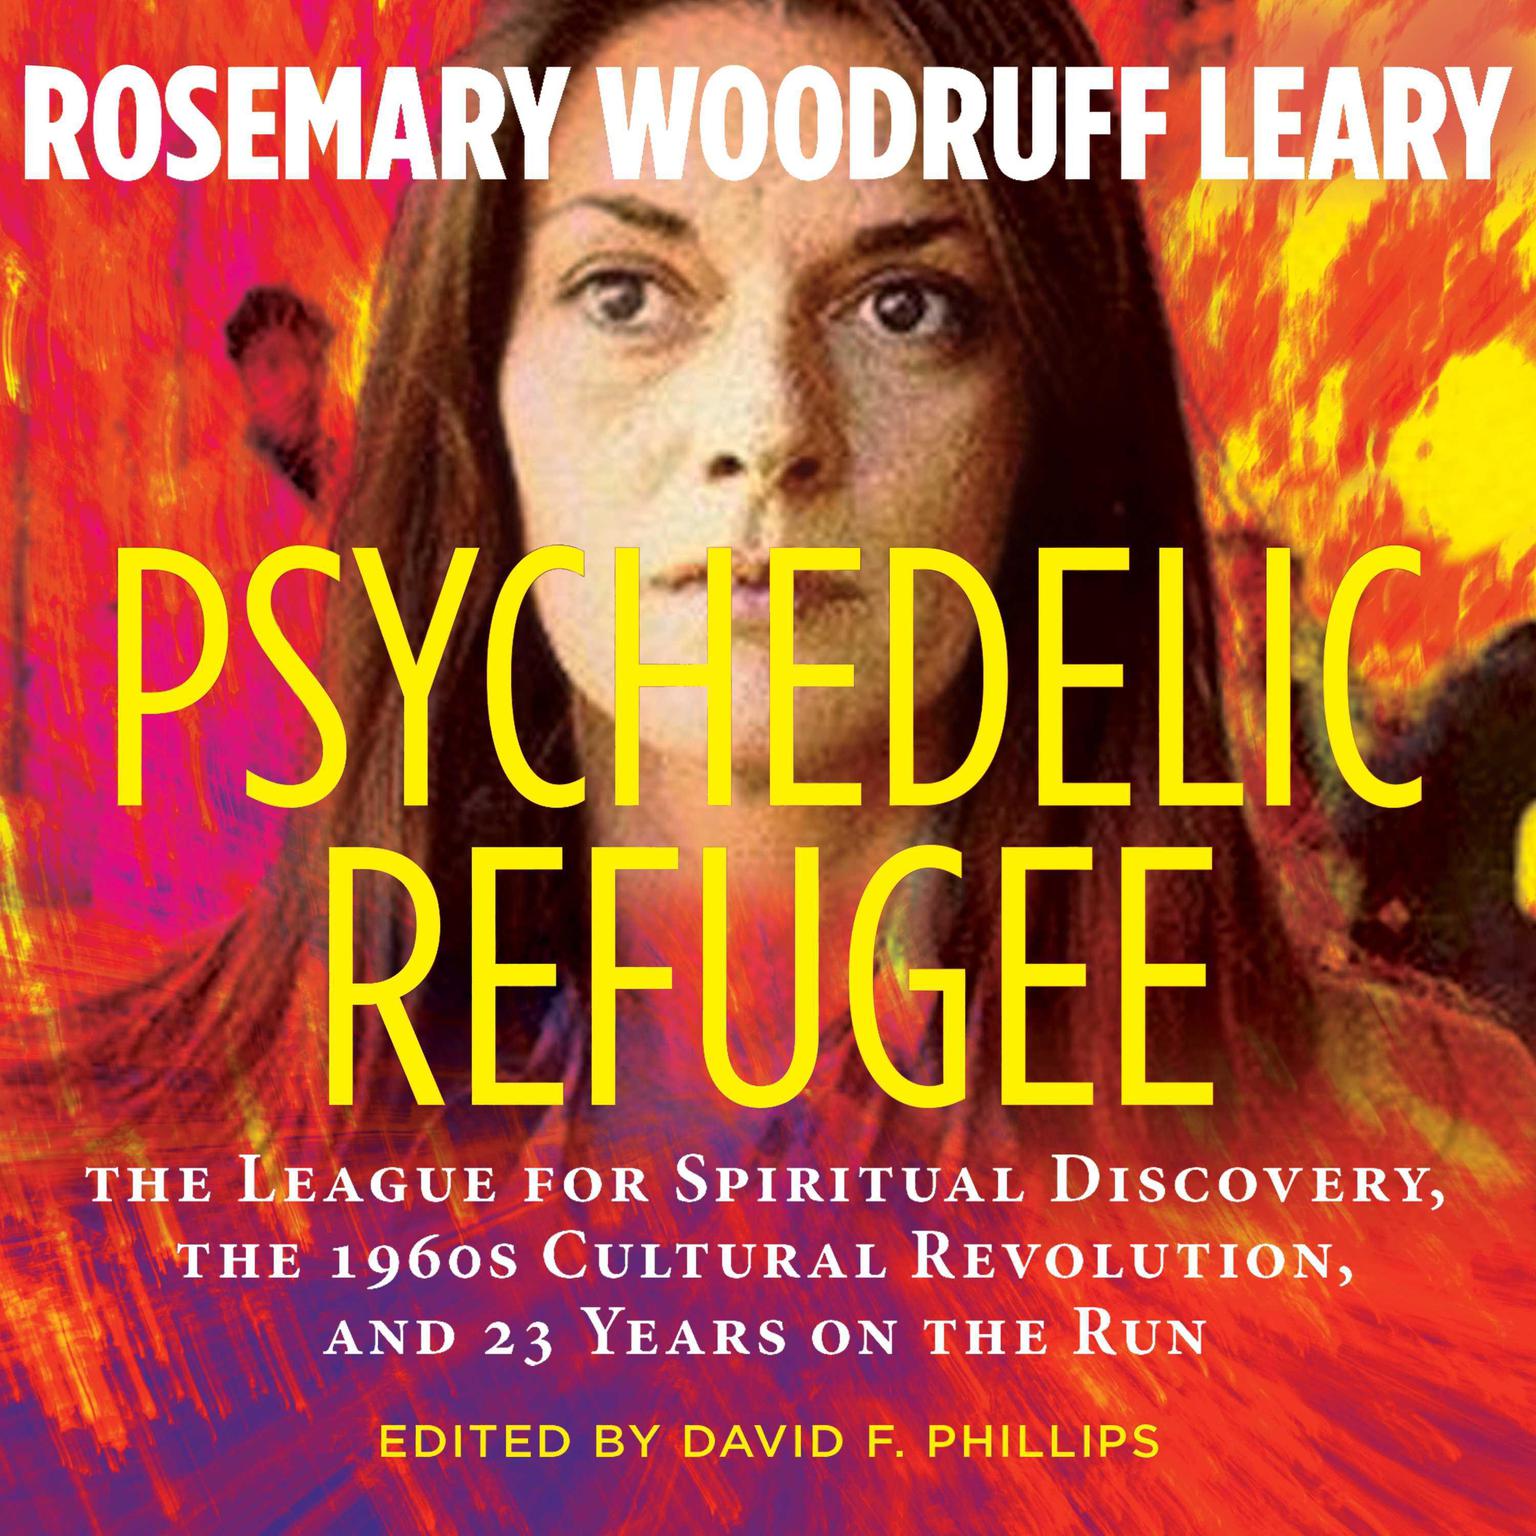 Psychedelic Refugee: The League for Spiritual Discovery, the 1960s Cultural Revolution, and 23 Years on the Run Audiobook, by Rosemary Woodruff Leary